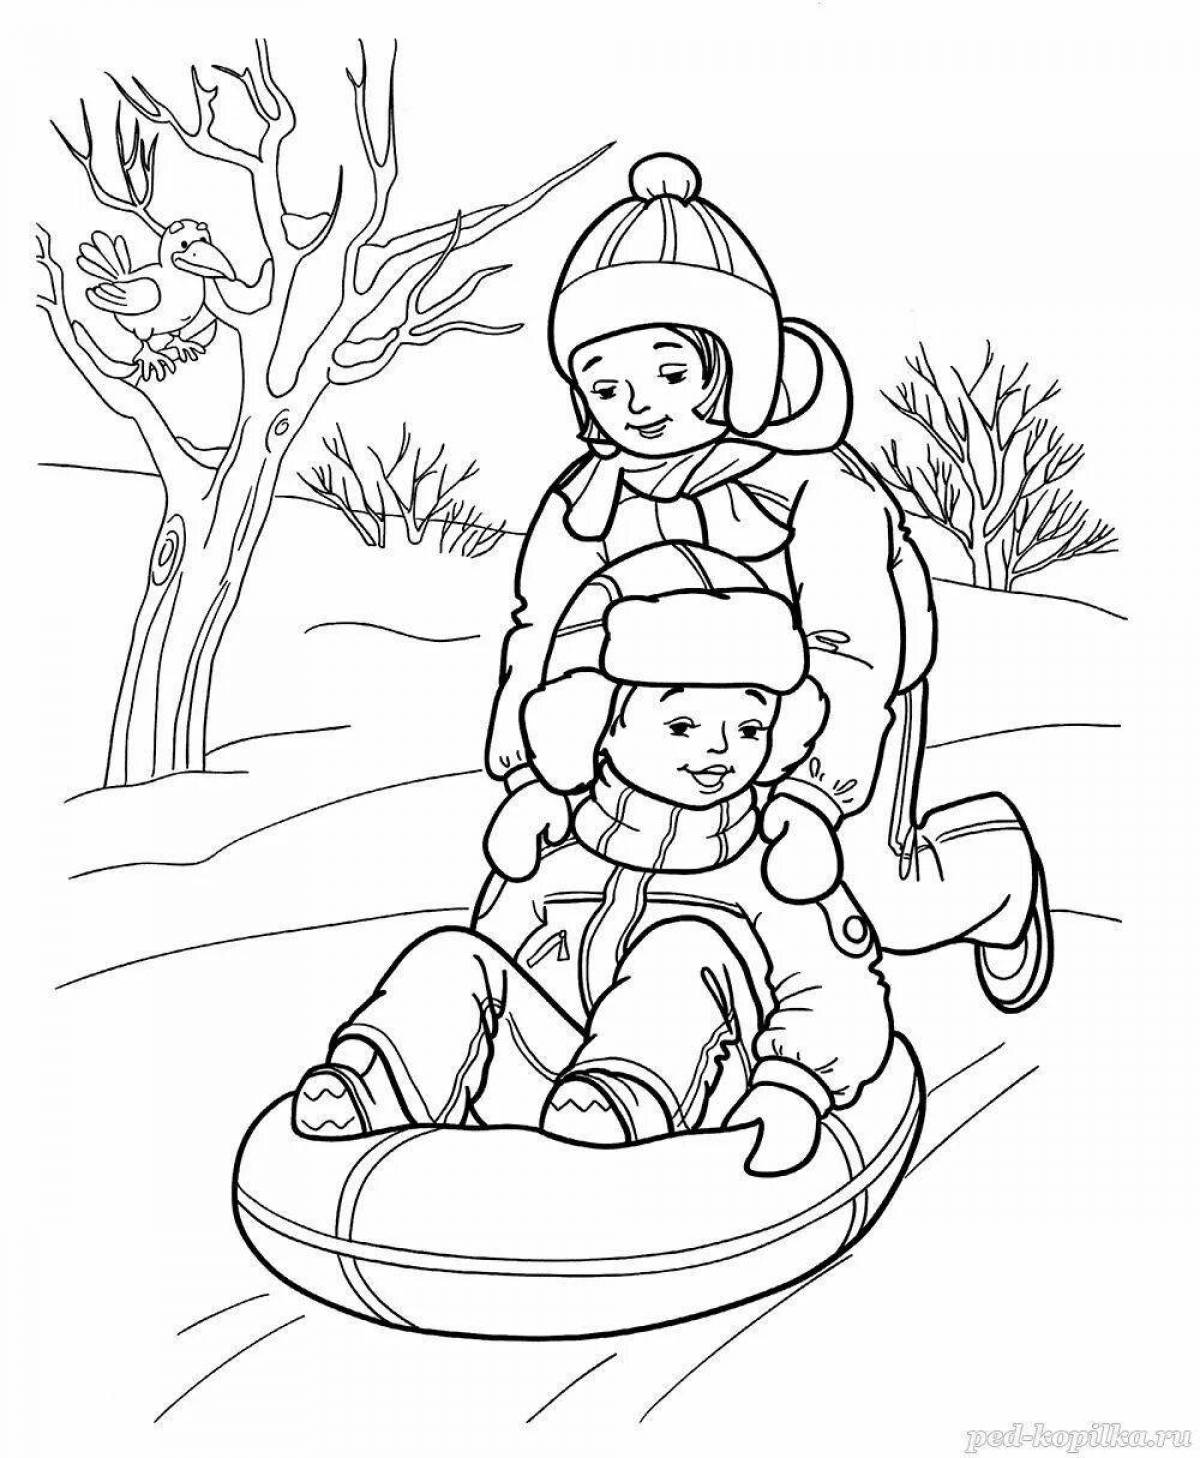 Glowing sleigh coloring page